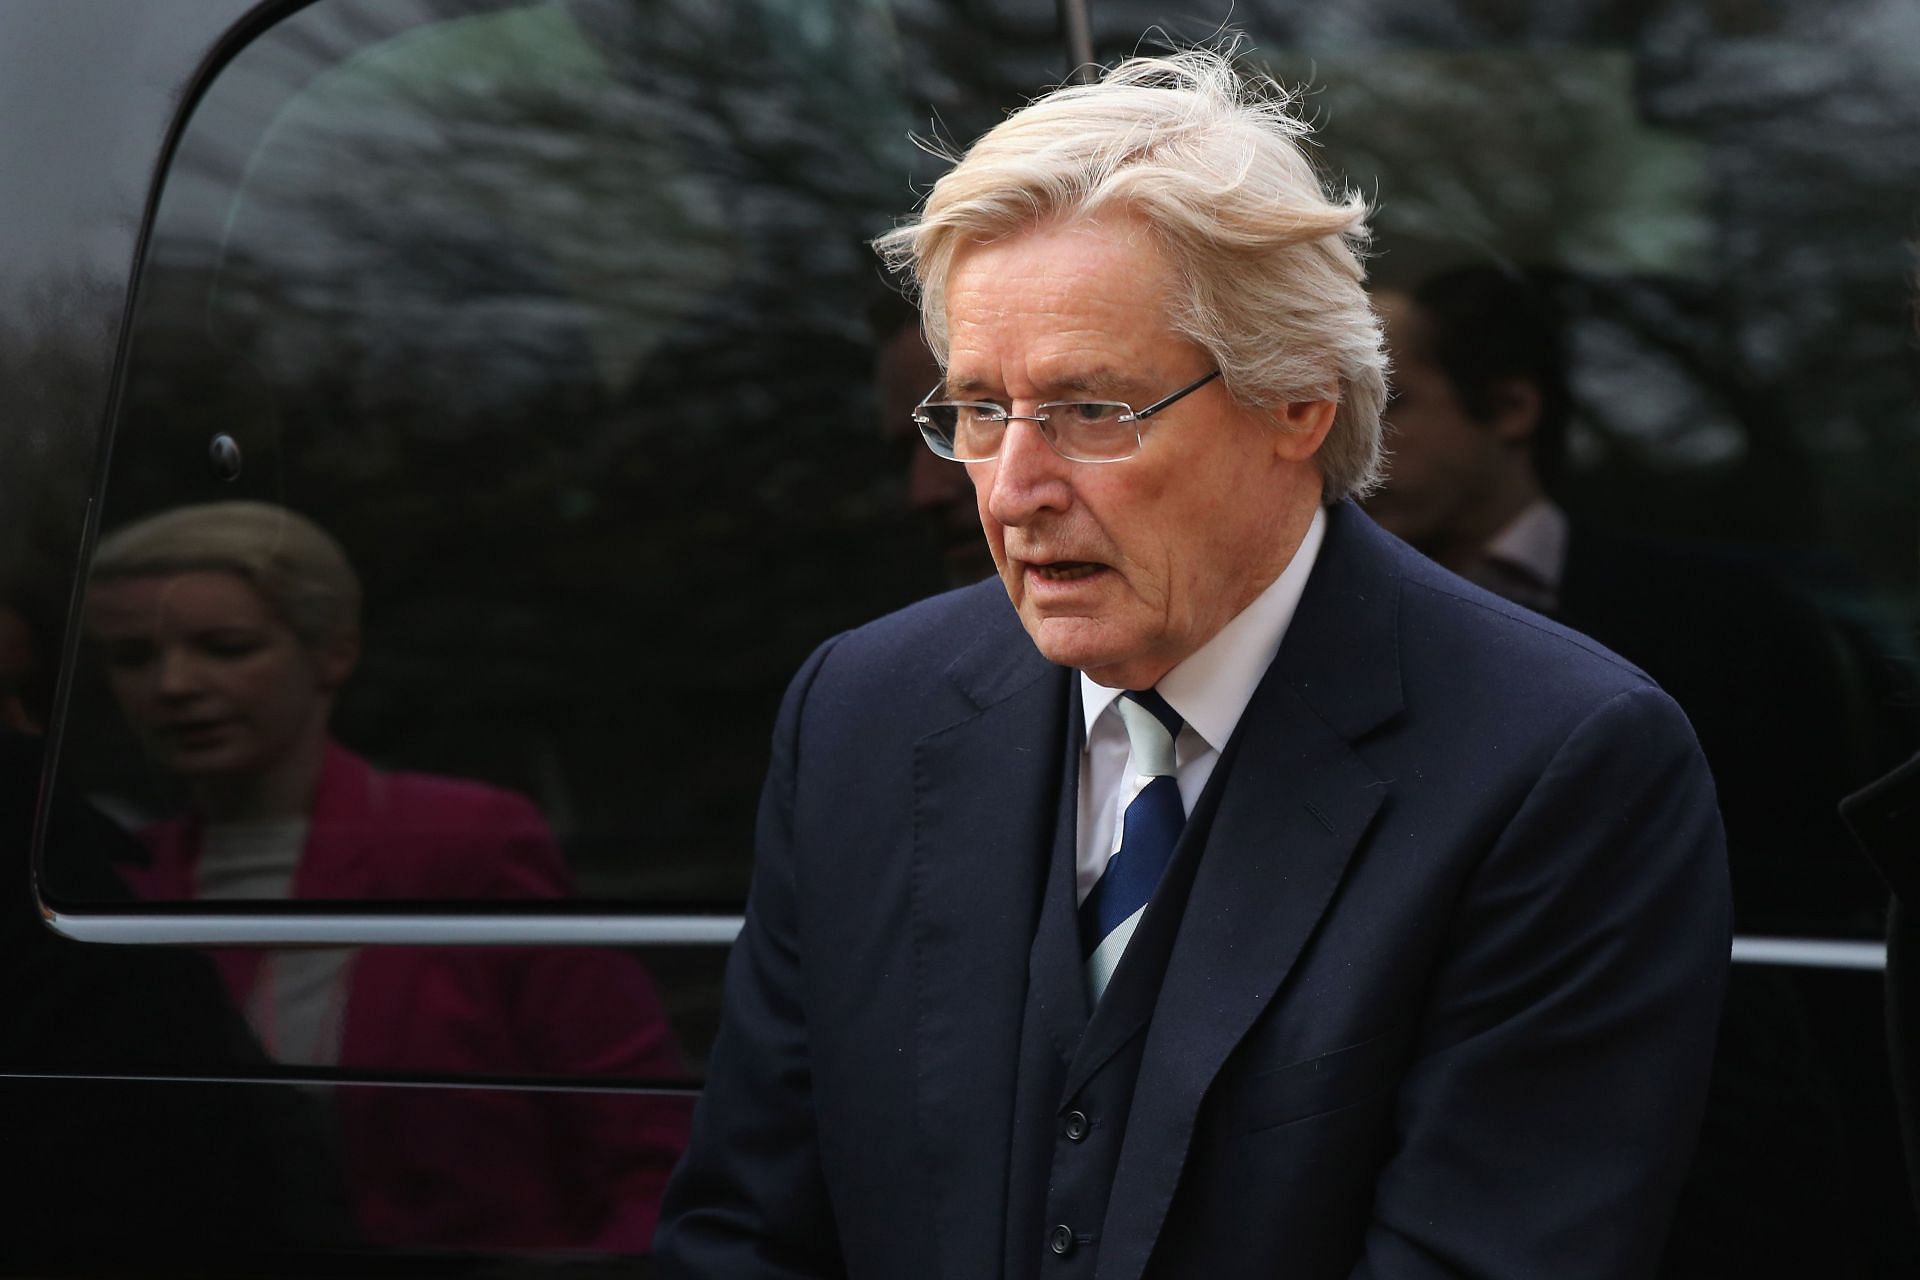 Bill Roache faces bankruptcy at the age of 91.